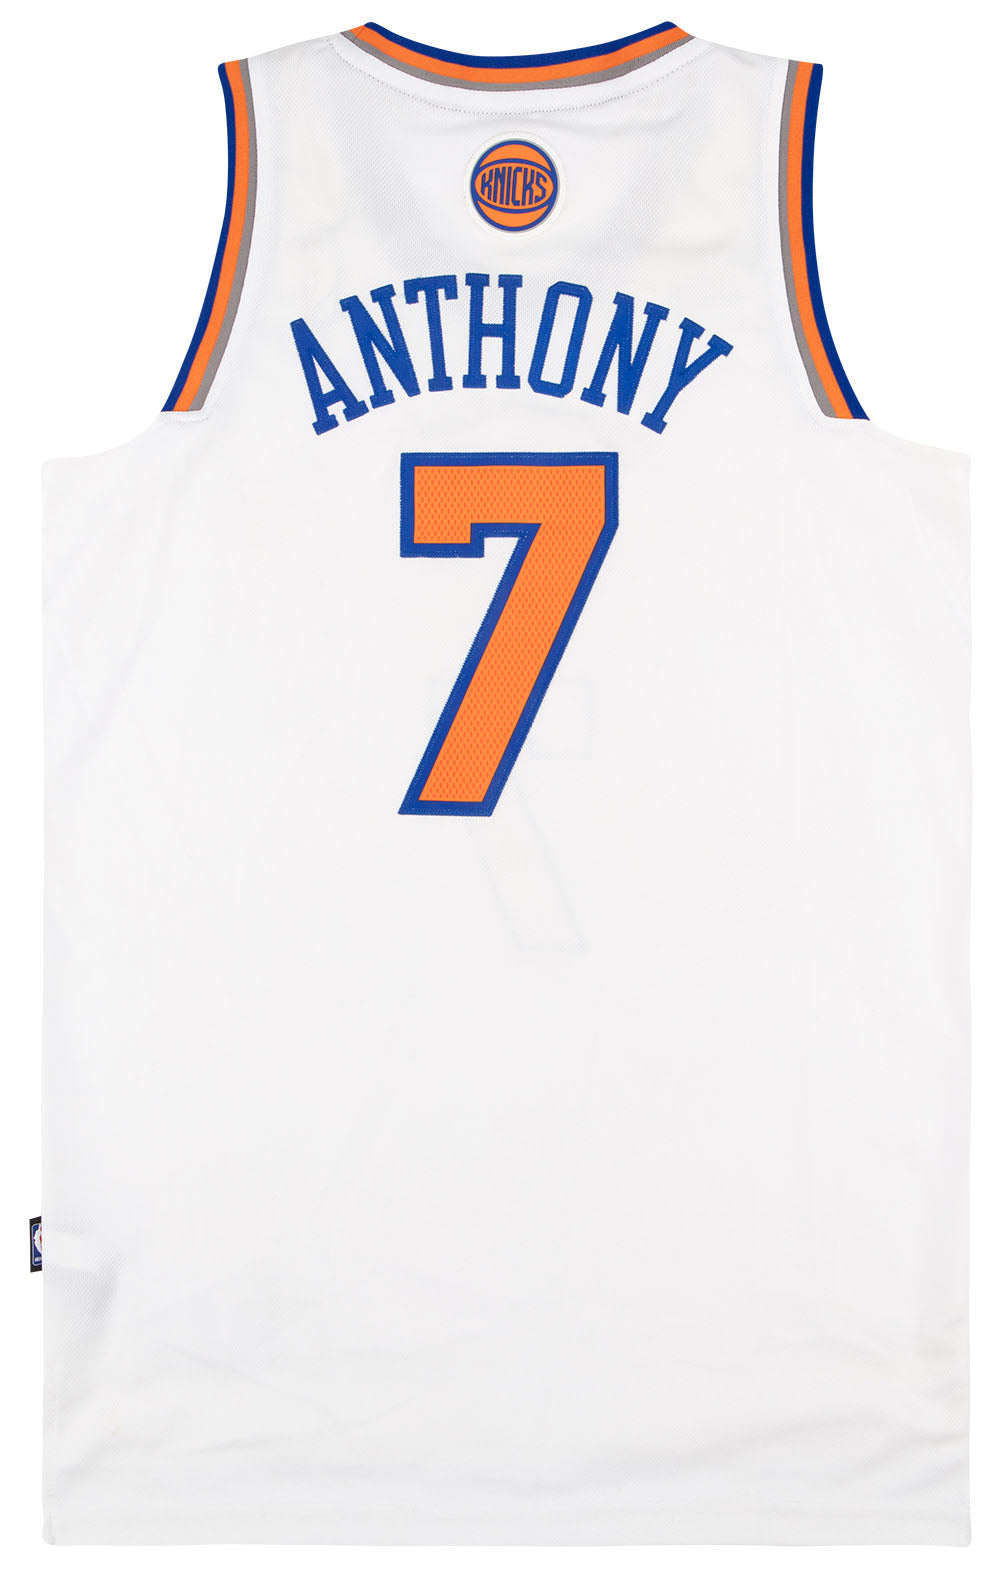 NEW Adidas 2014 NOLA NBA All Star East Carmelo Anthony Knicks Youth Jersey  S/L